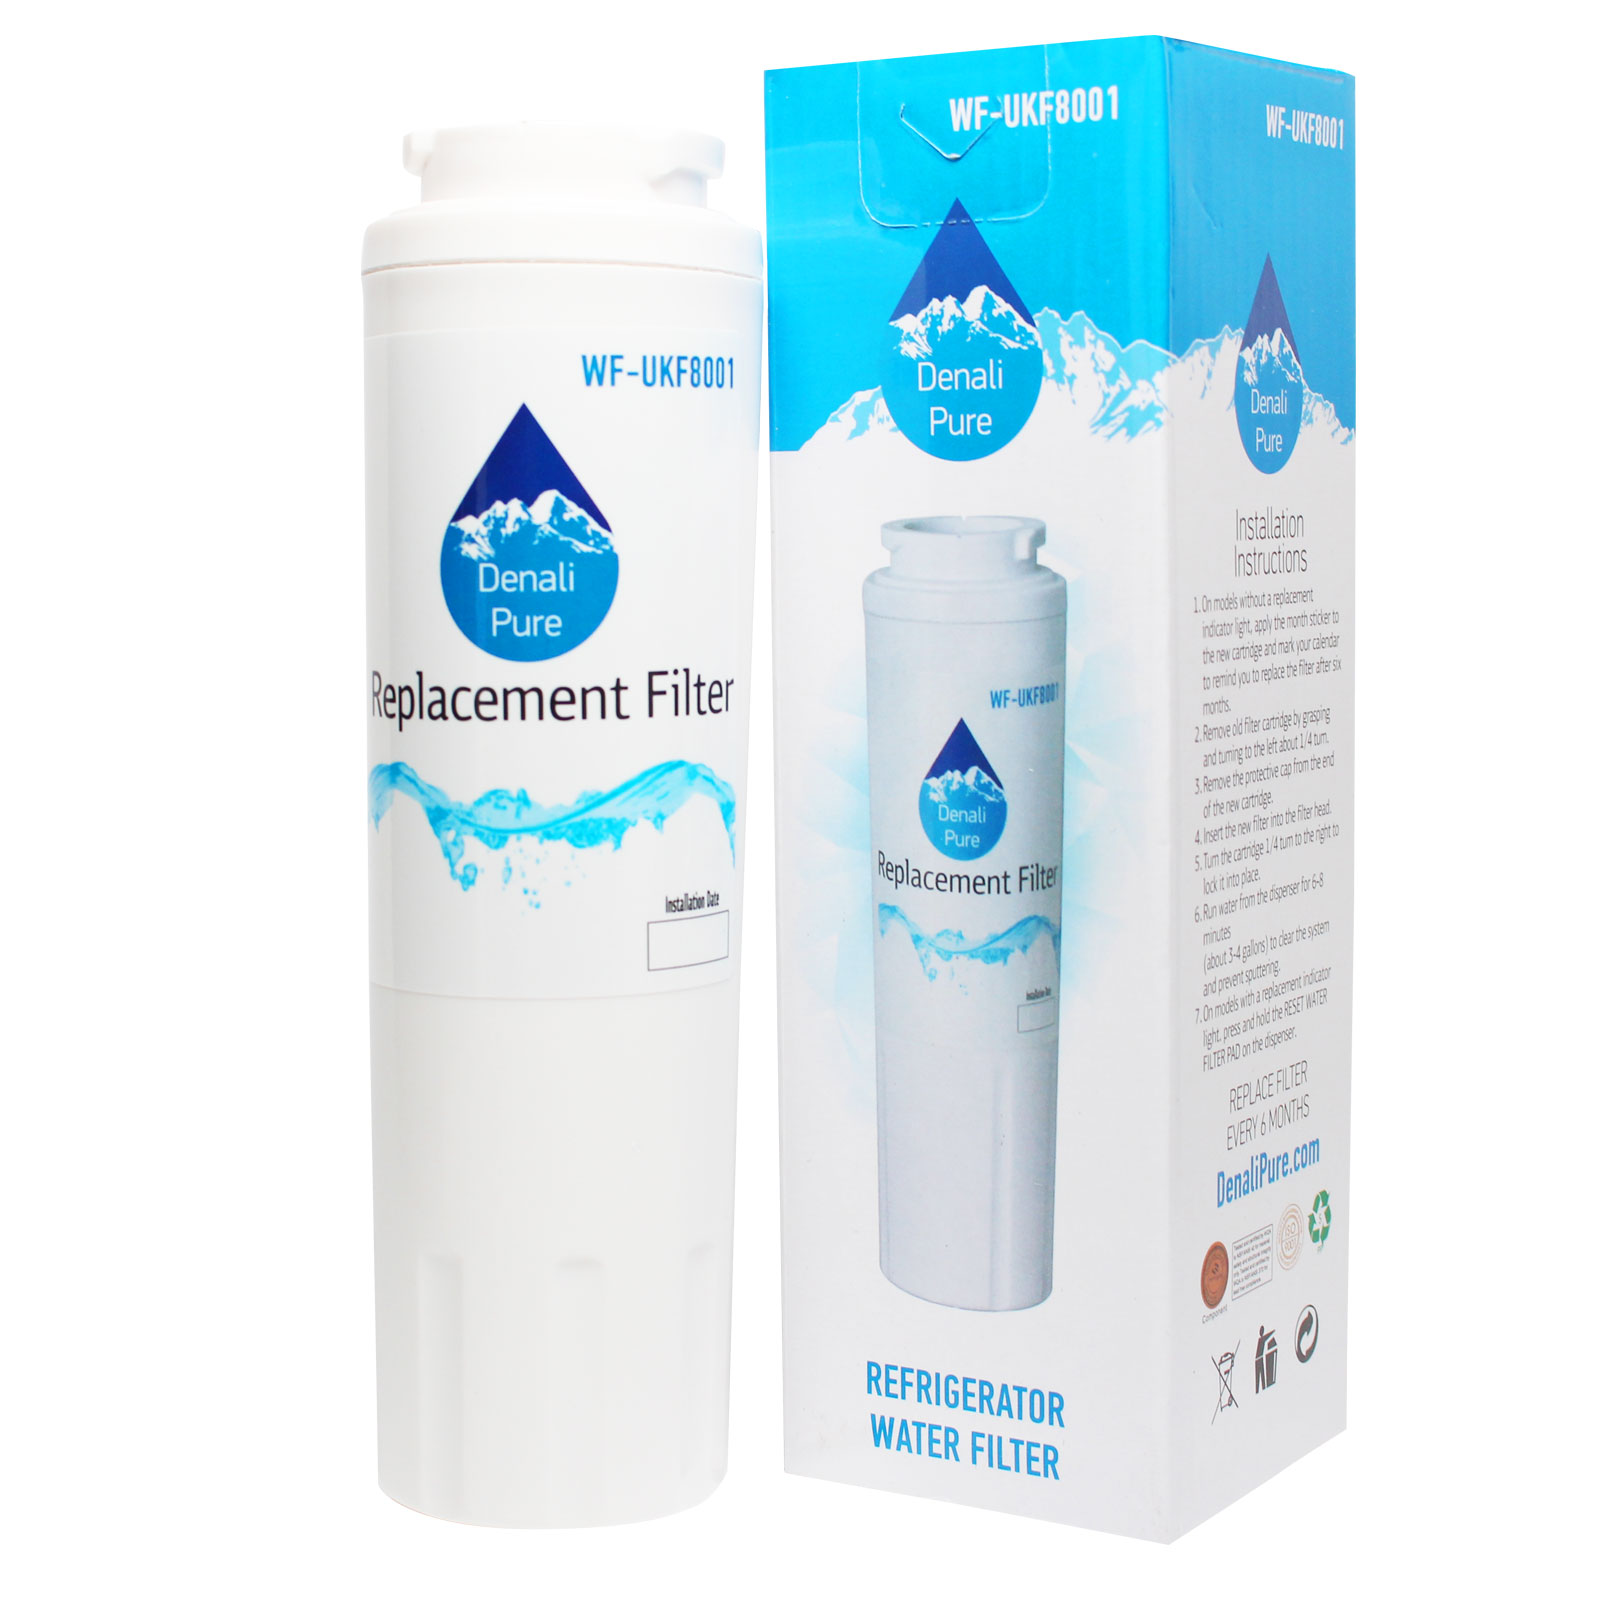 2-Pack Replacement for Whirlpool GI5FVAXVQ01 Refrigerator Water Filter - Compatible with Whirlpool 4396395 Fridge Water Filter Cartridge - image 2 of 4